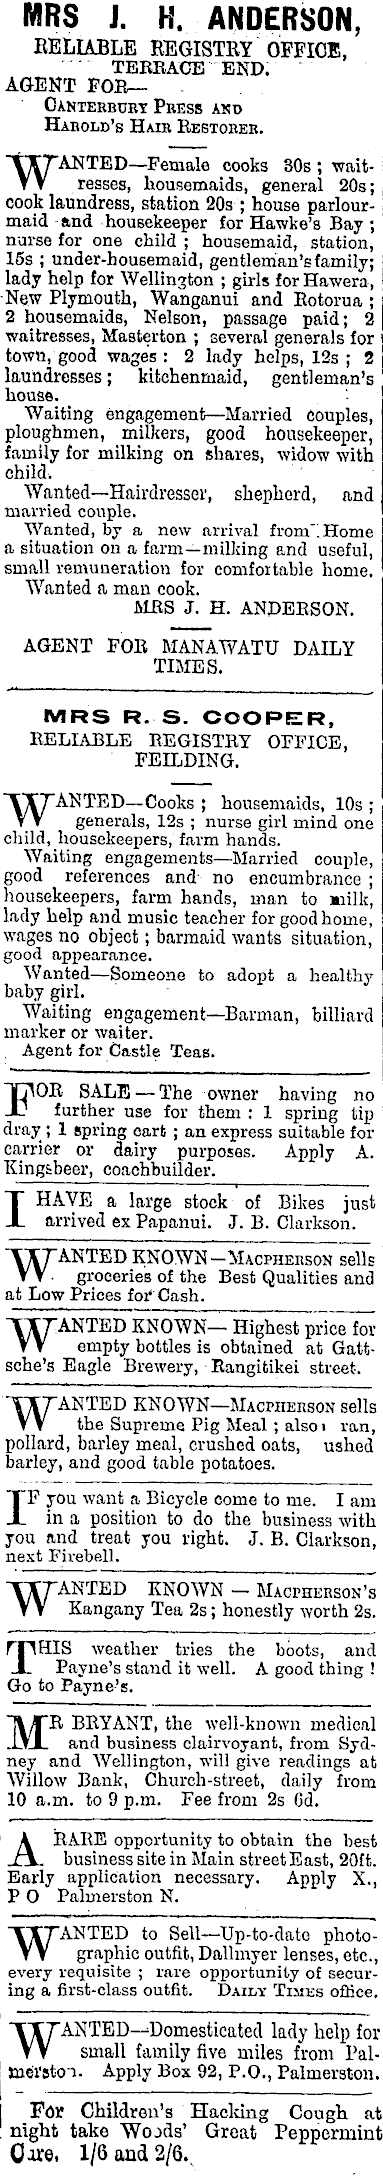 Papers Past Newspapers Manawatu Times 3 June 1903 Page 1 Advertisements Column 8